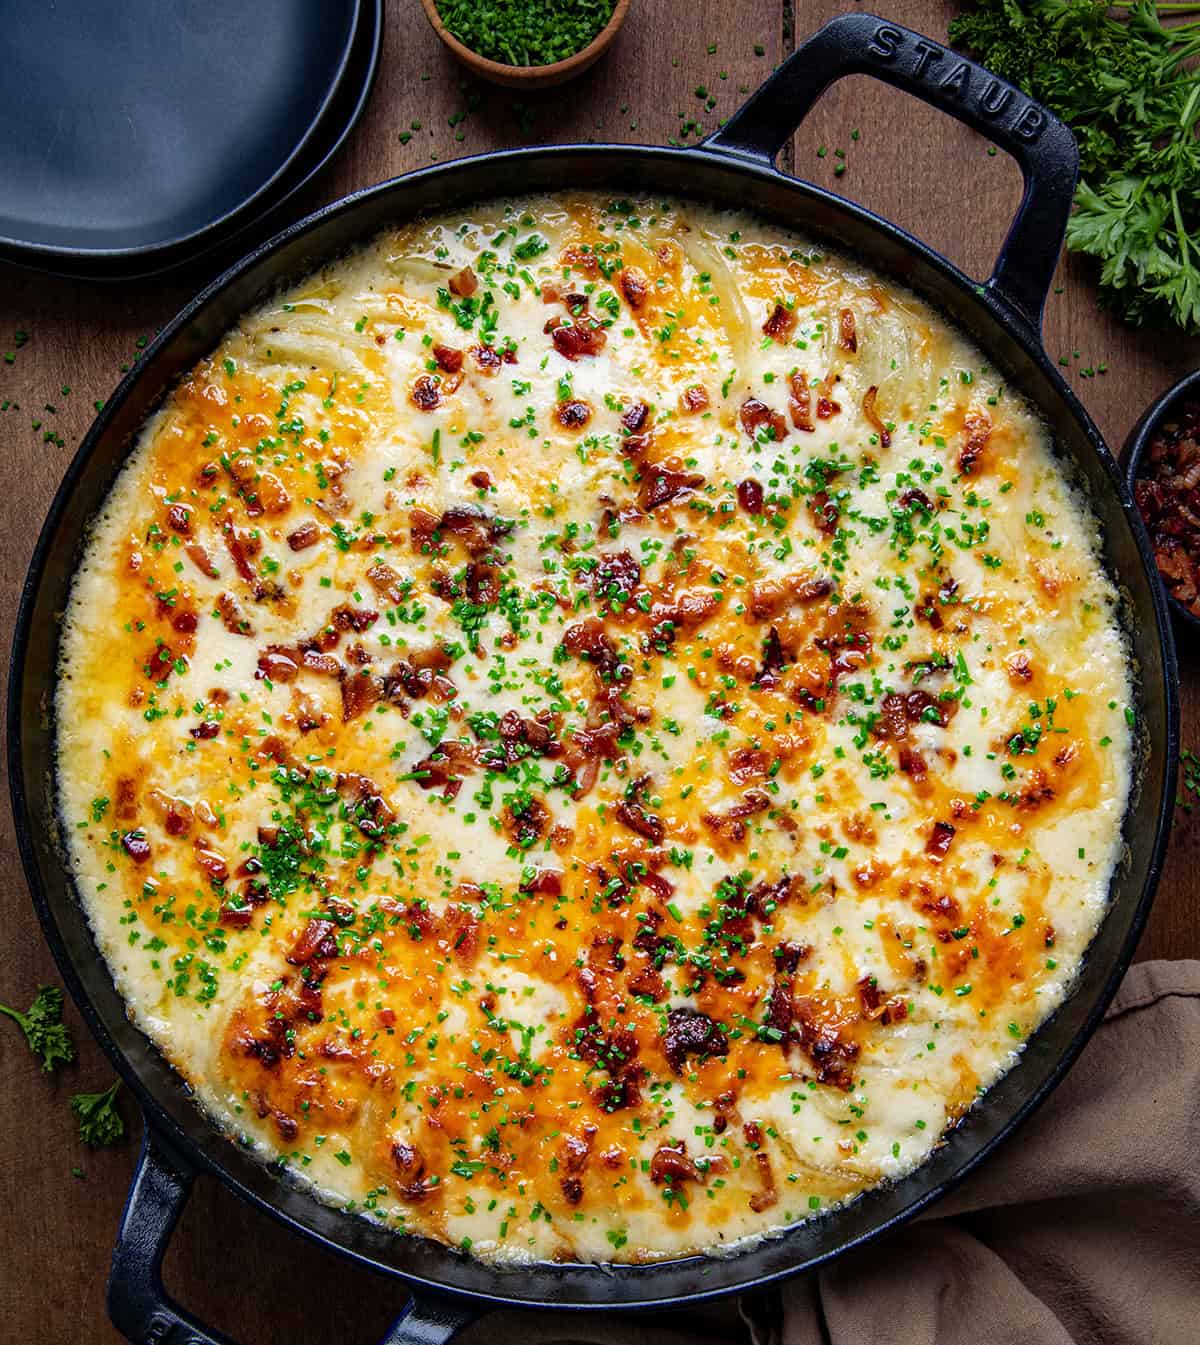 Skillet of Loaded Scalloped Potatoes on a wooden table from overhead.